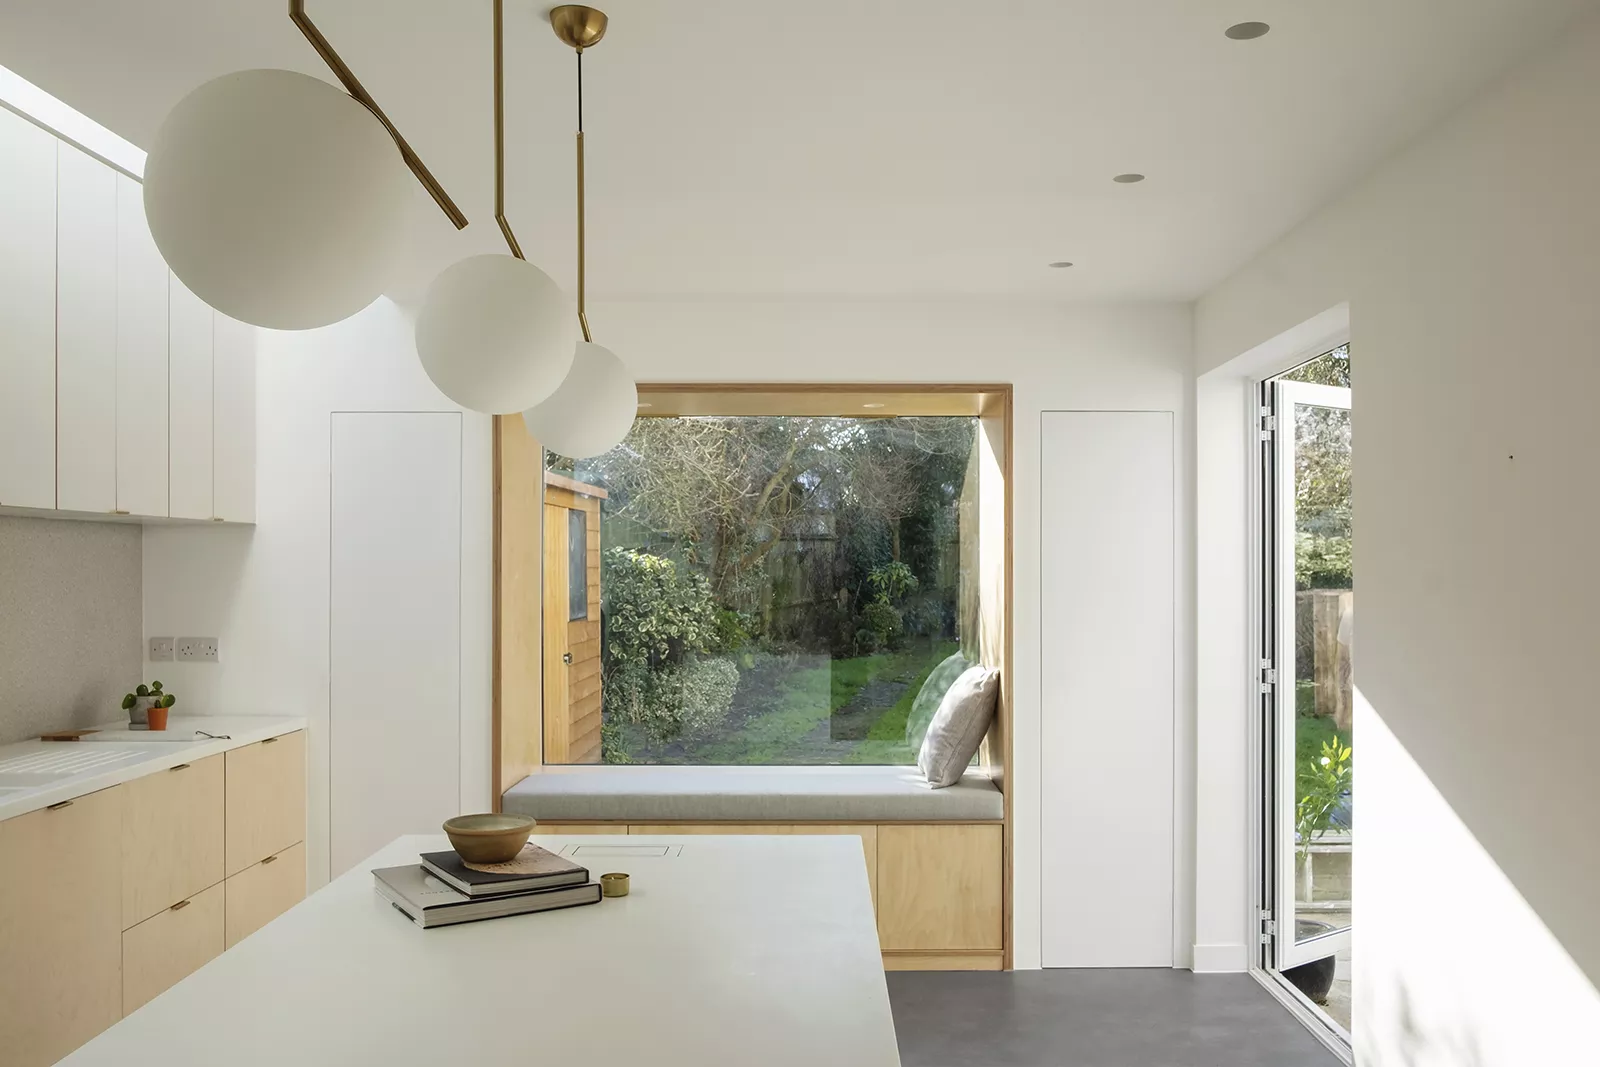 A dreamy minimalist kitchen with HIMACS elements in the Nook House